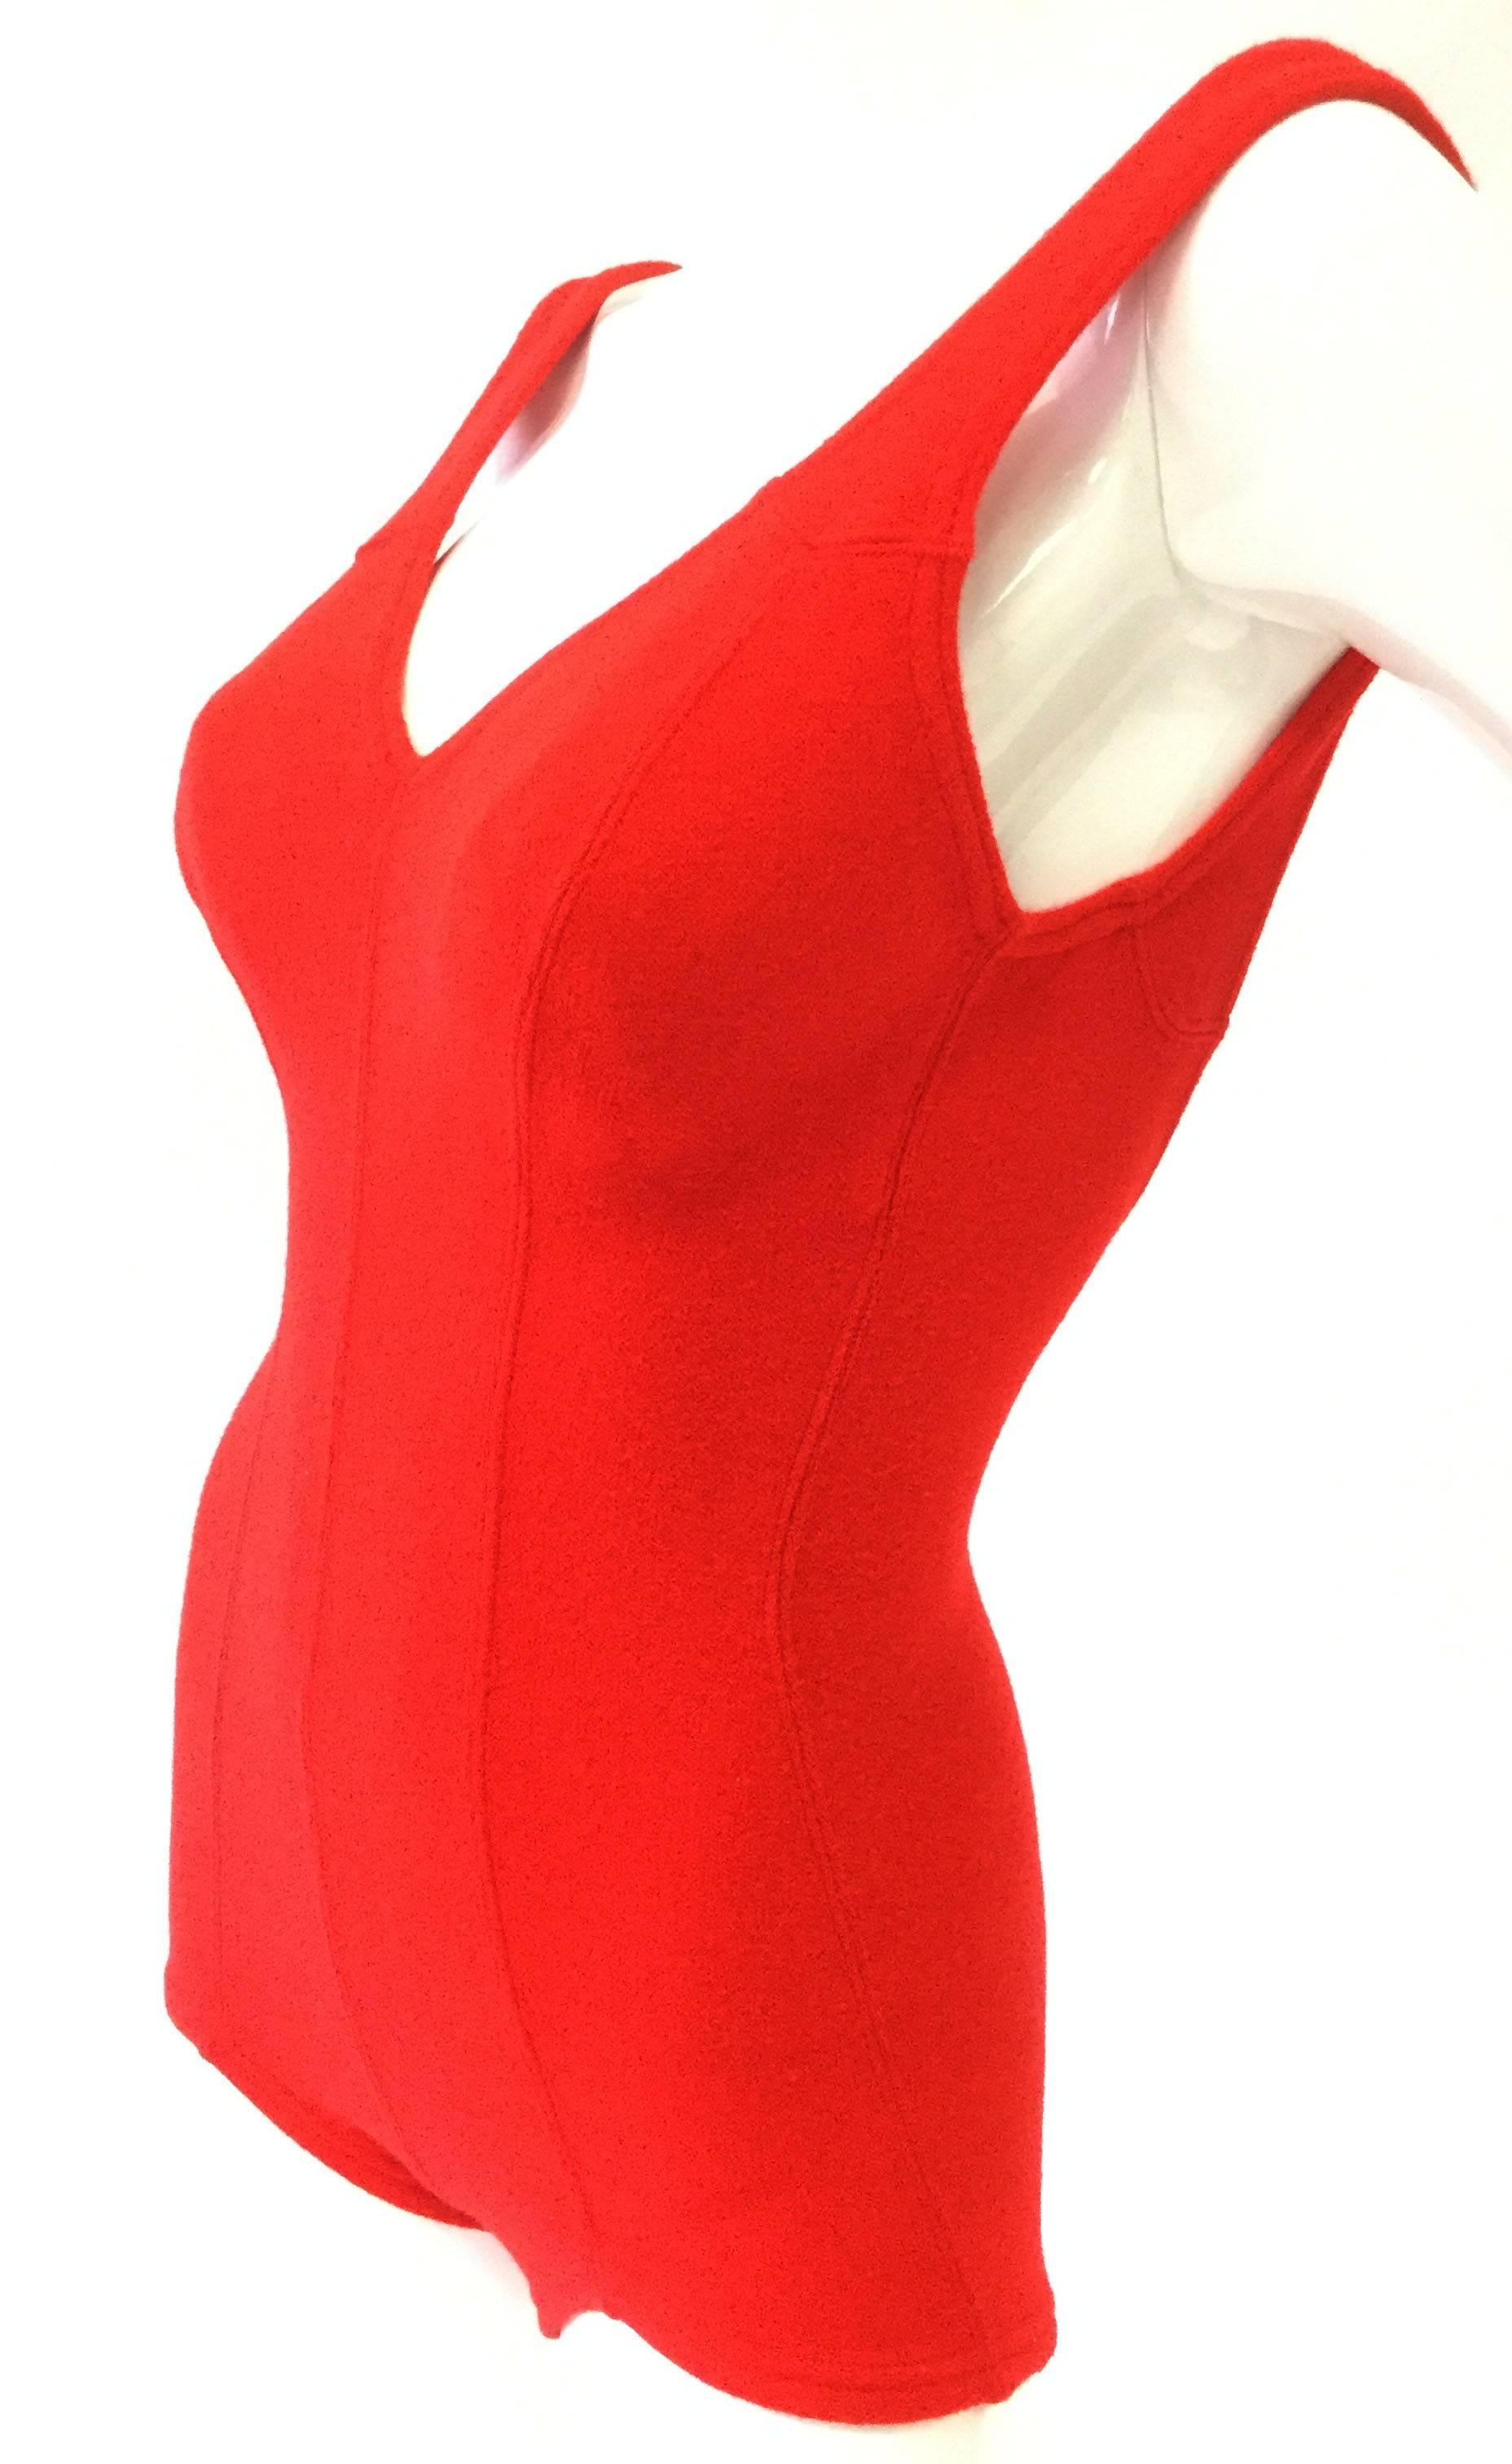 
This adorable swimsuit romper by De Weese features a striking three line seam design at the center front, created by the garment's paneled construction. The piece has a boy-short bottom, a deep v-neck collar, thick straps, and a plunging back.